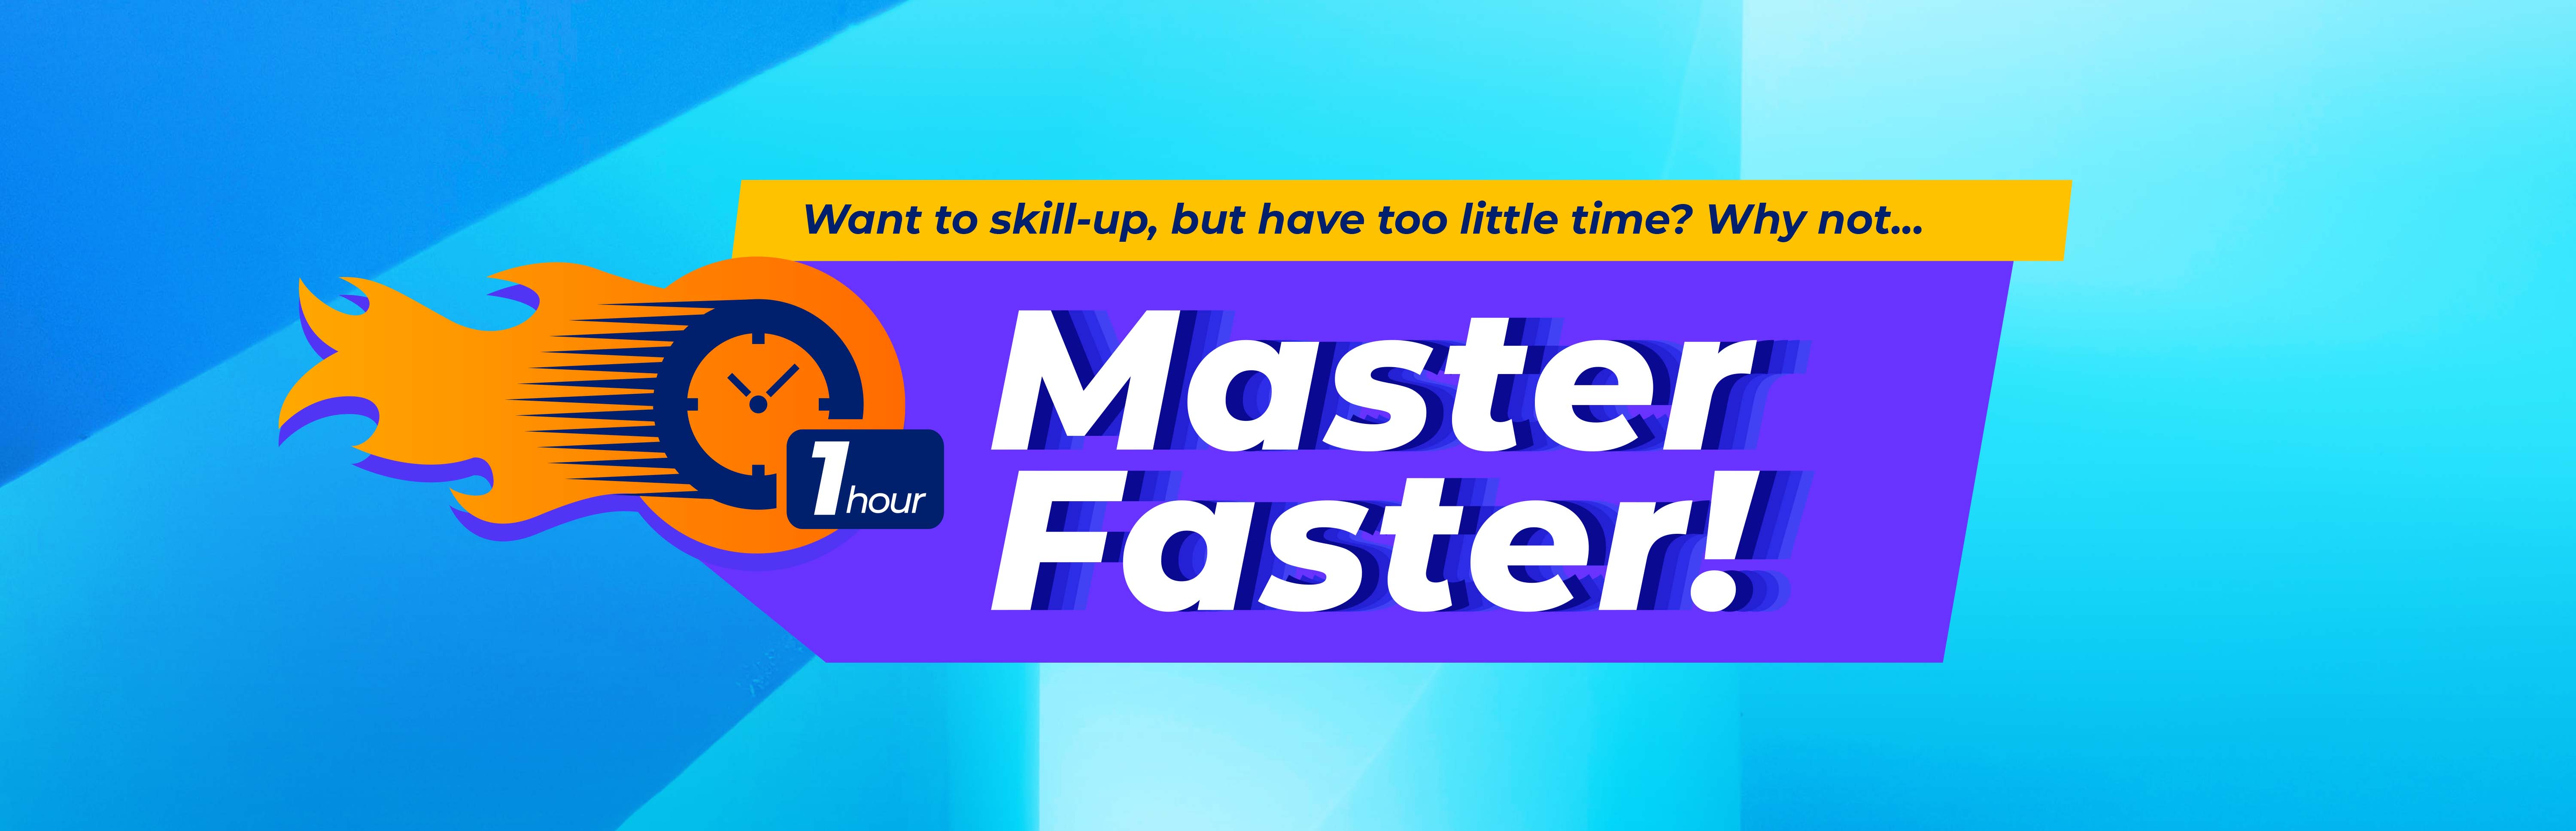  Master Faster by Digital Learning Hub